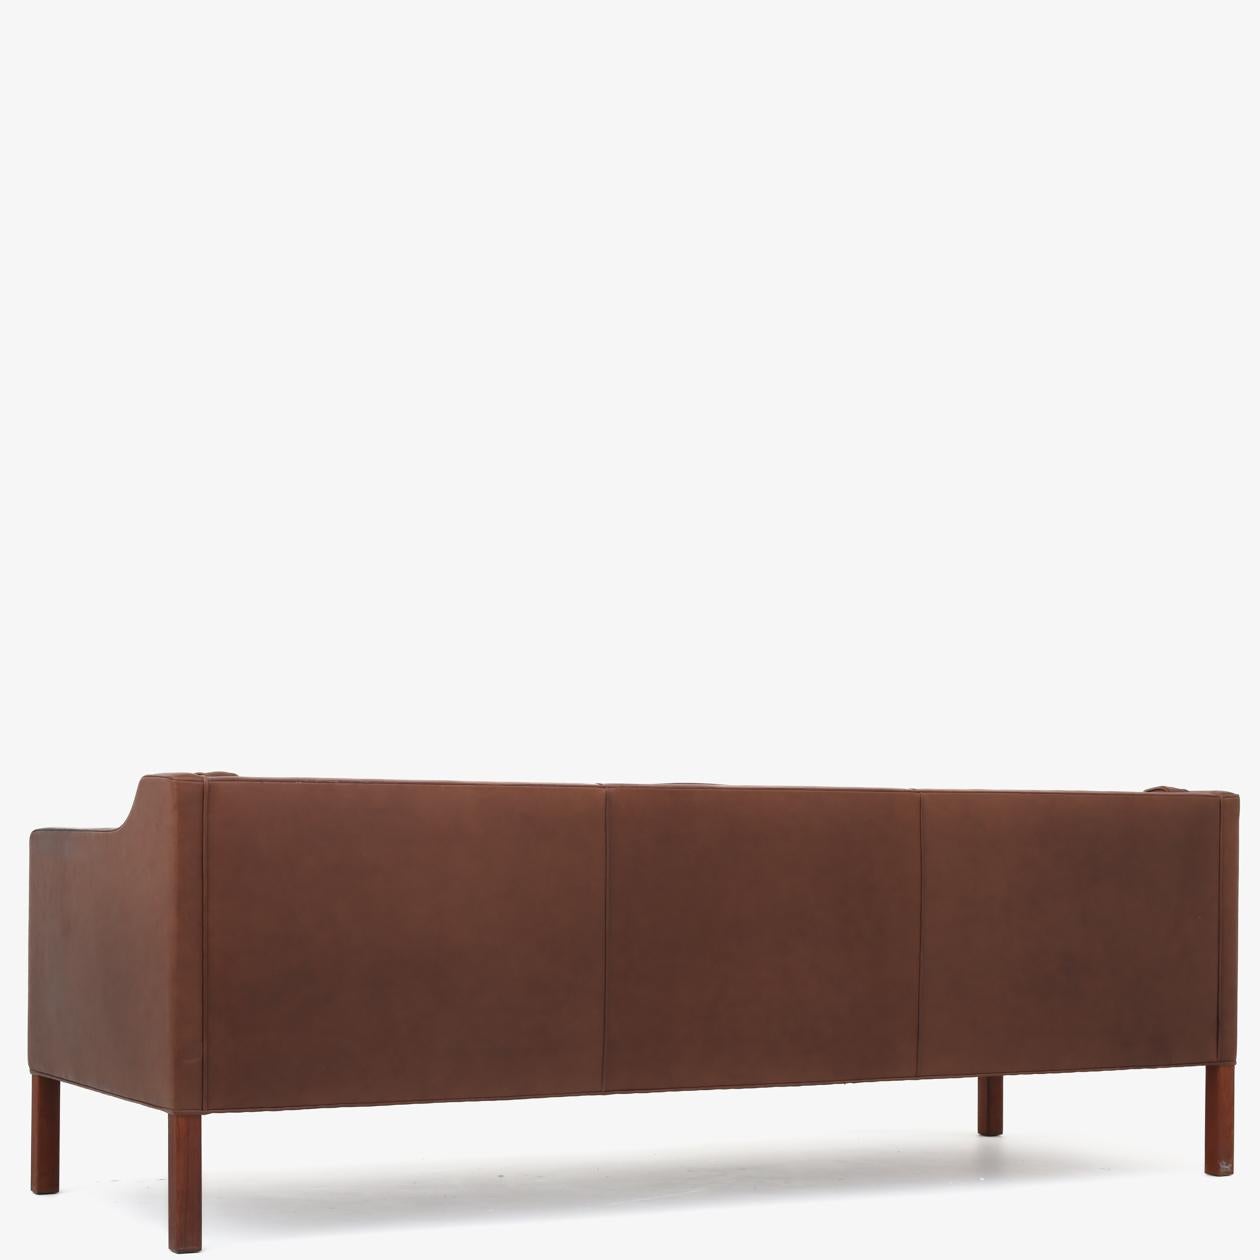 BM 2213 - 3 seater sofa in patinated brown leather on teak legs. Børge Mogensen / Fredericia Furniture.